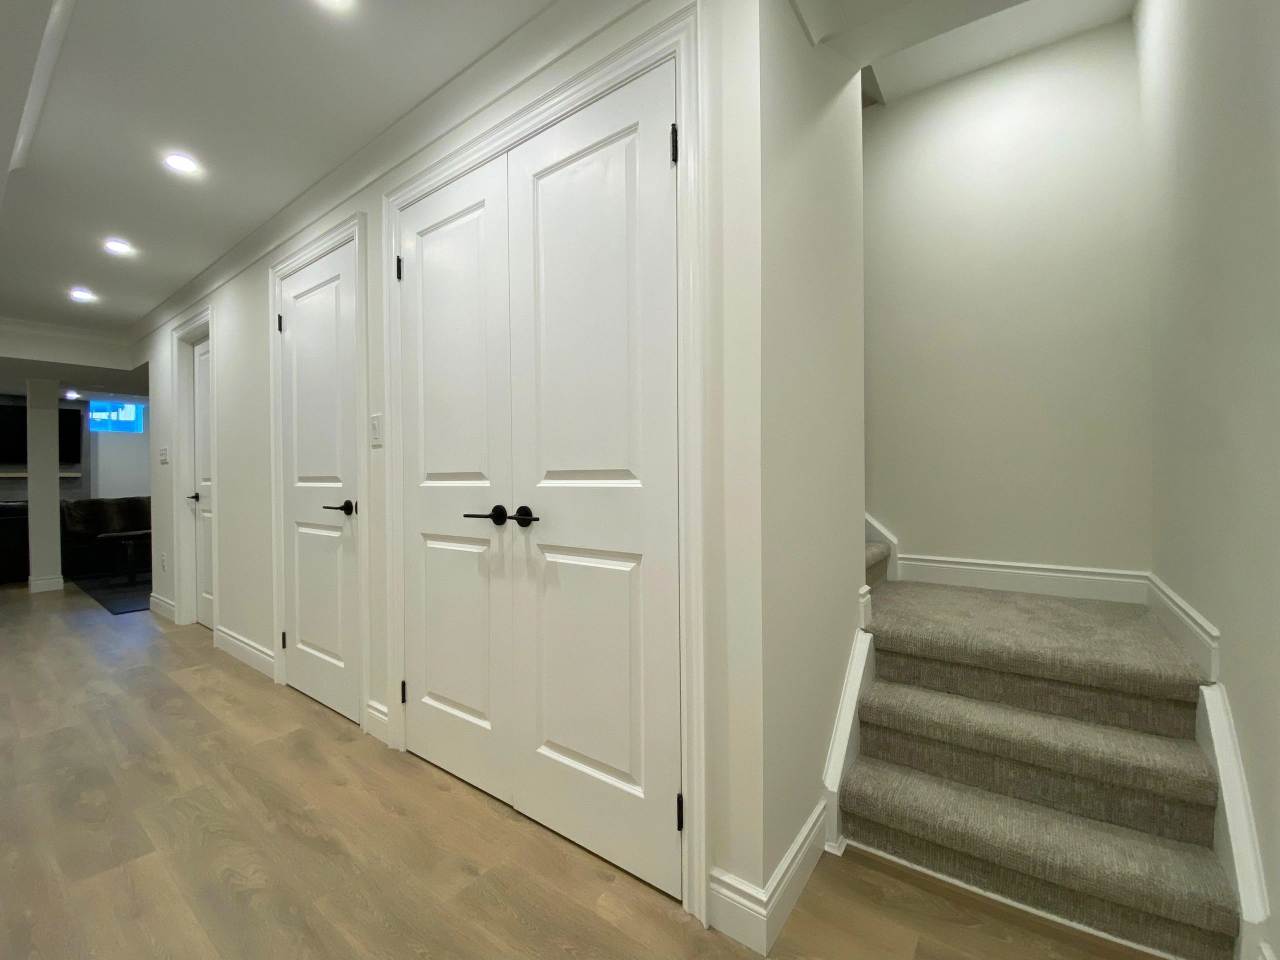 A hallway with white doors and stairs leading to the basement.